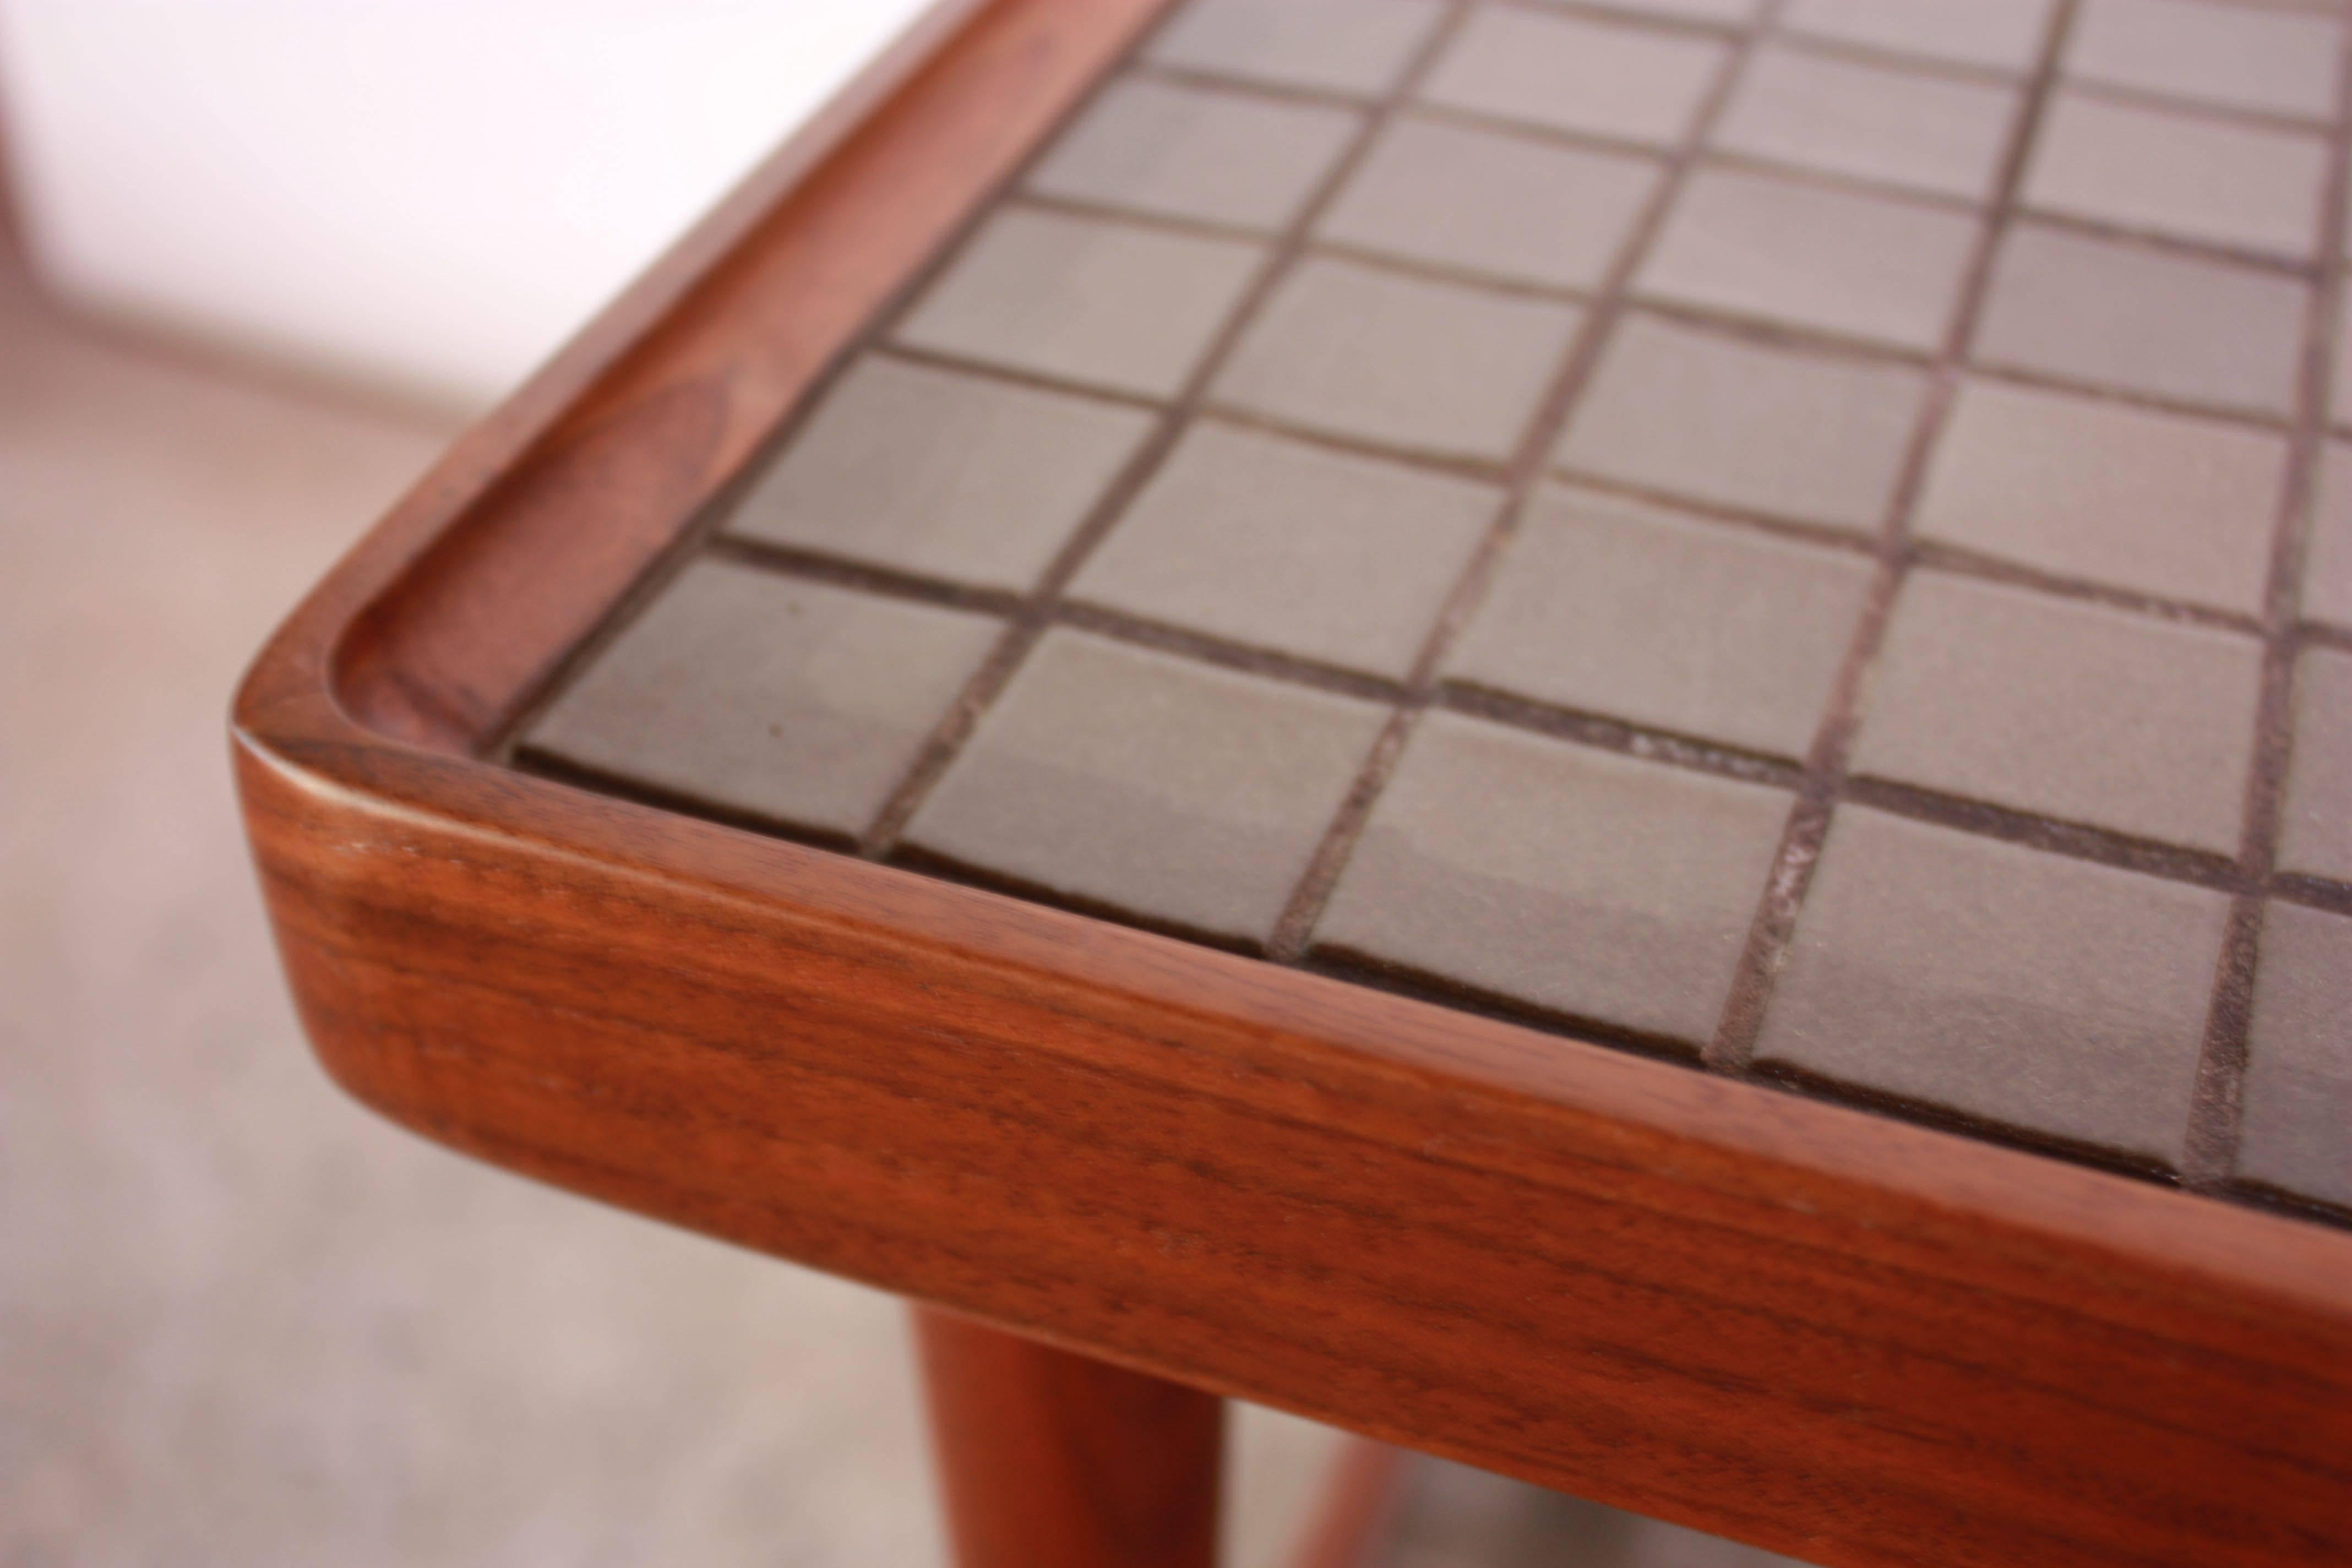 Two-Tiered Martz Ceramic Tile and Walnut Teacart 2